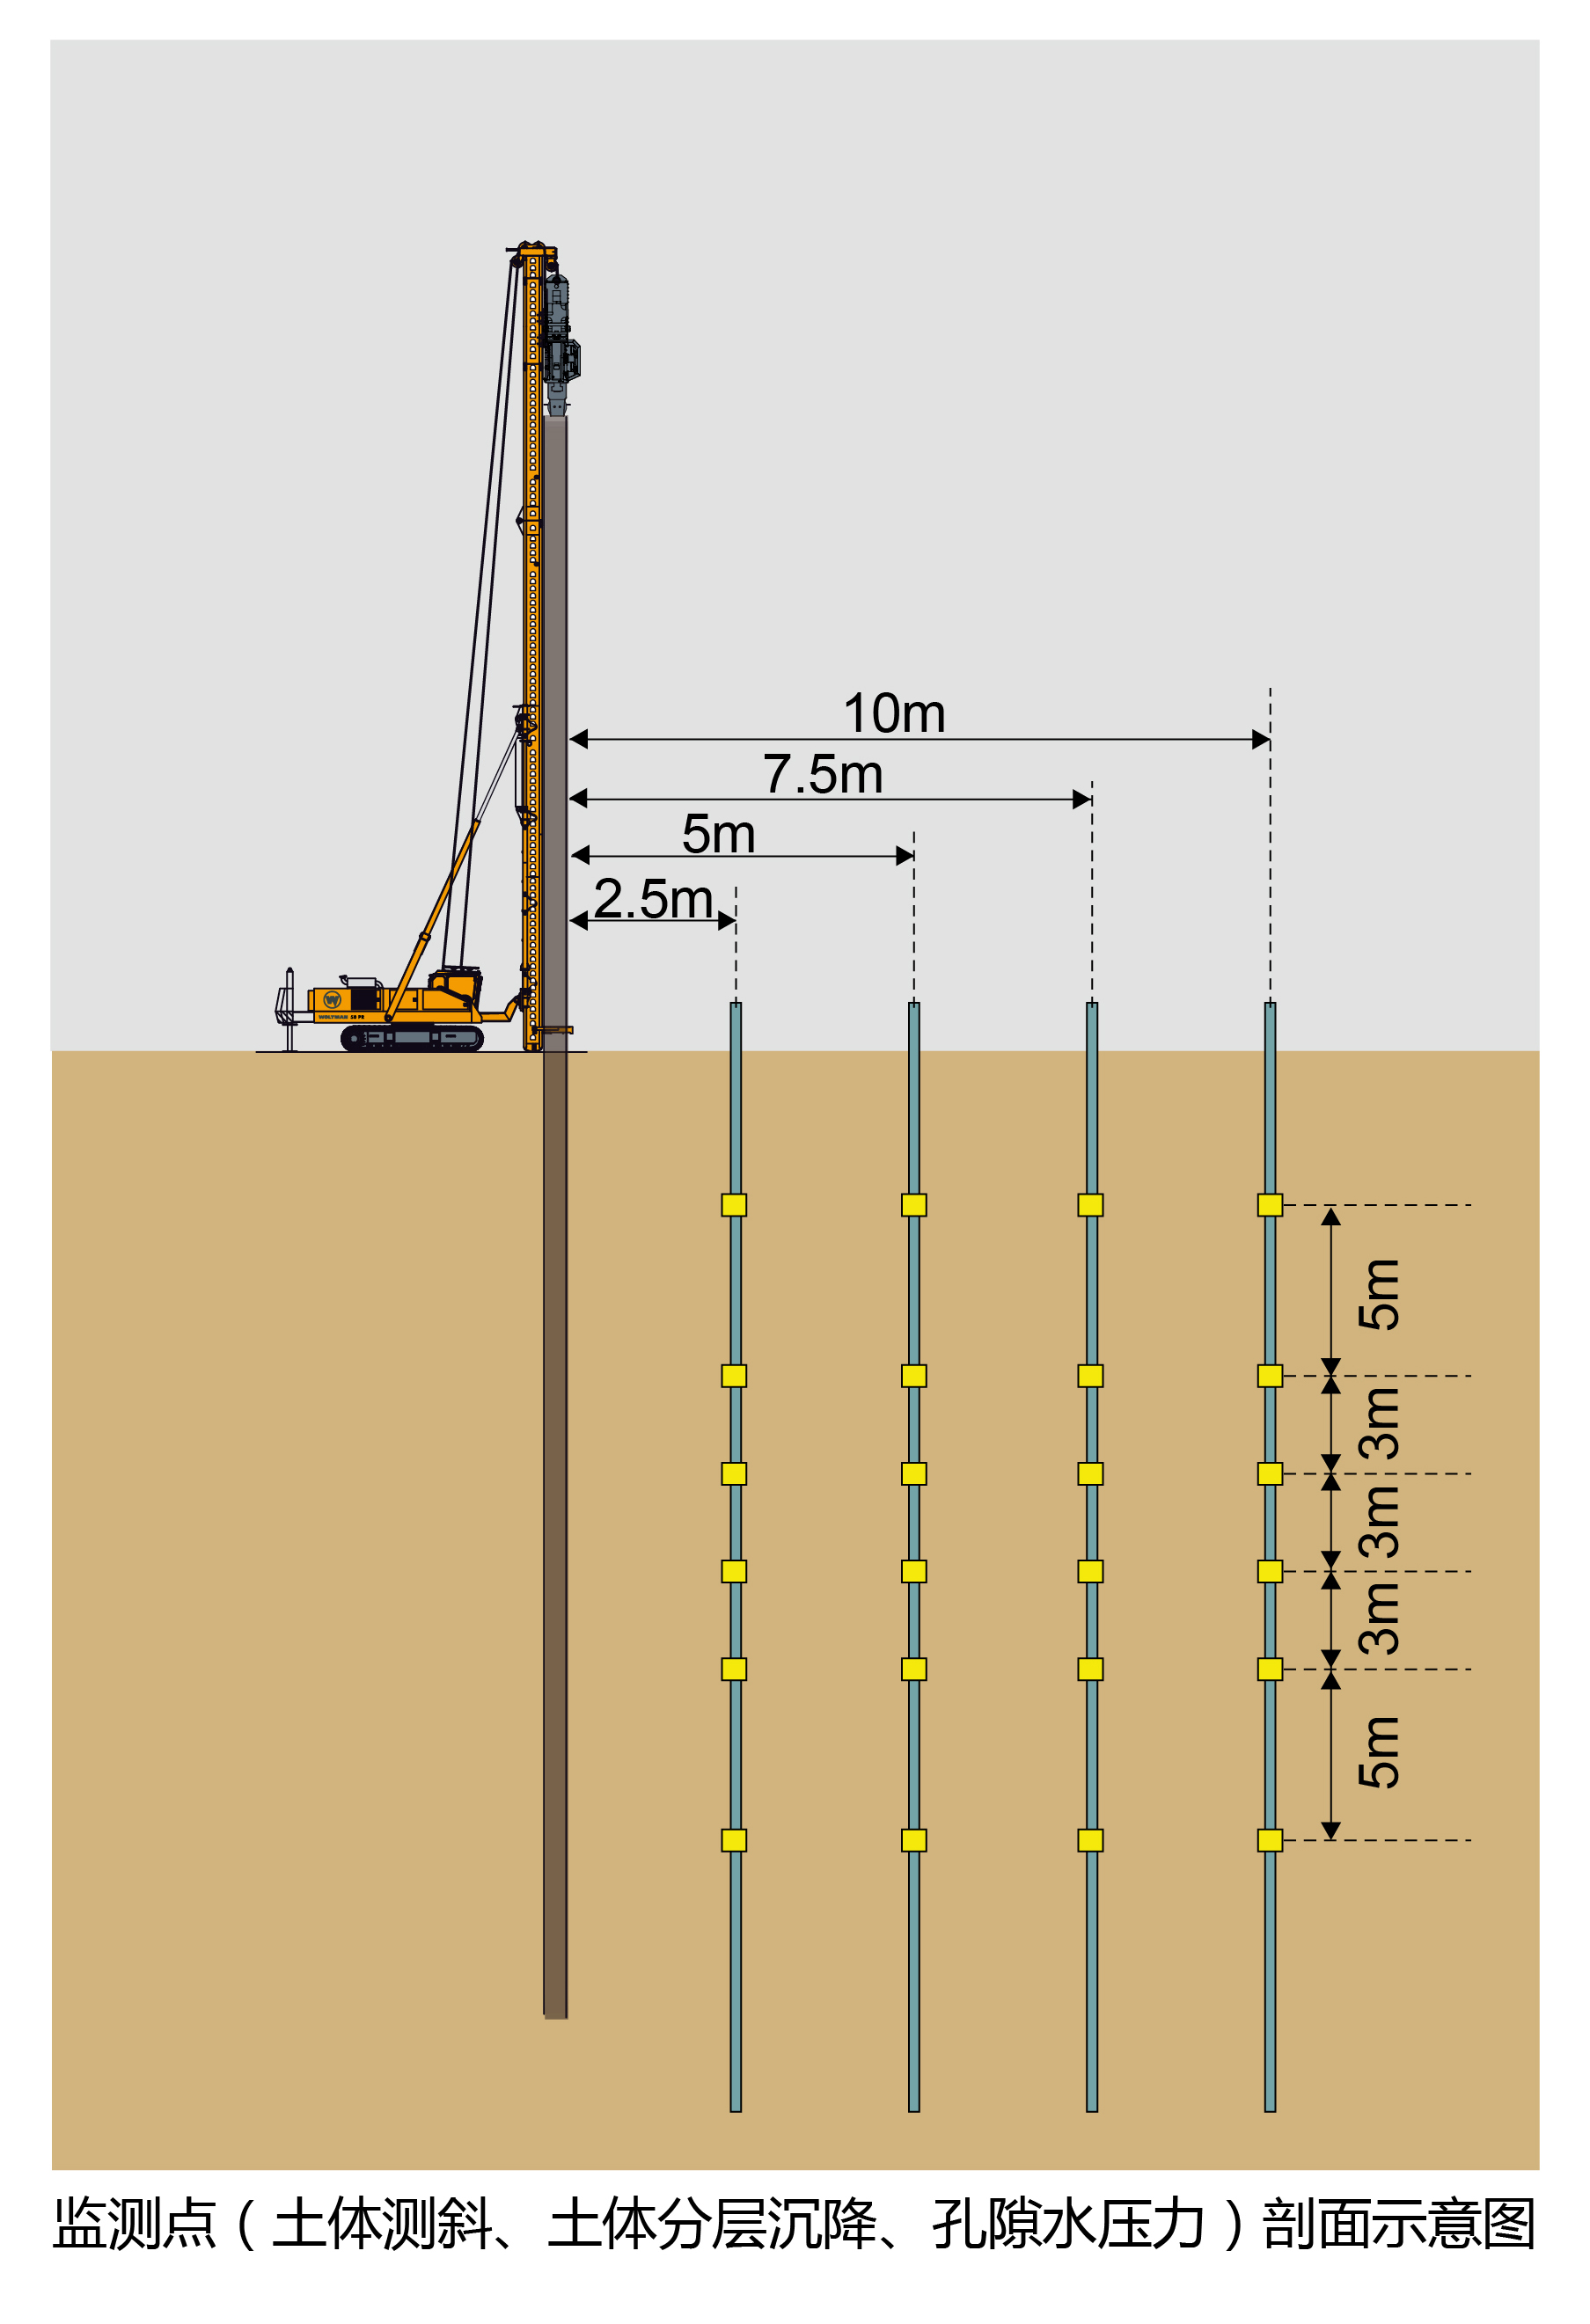 ICE,variable moment, resonance free piling hammer, amplitude frequency